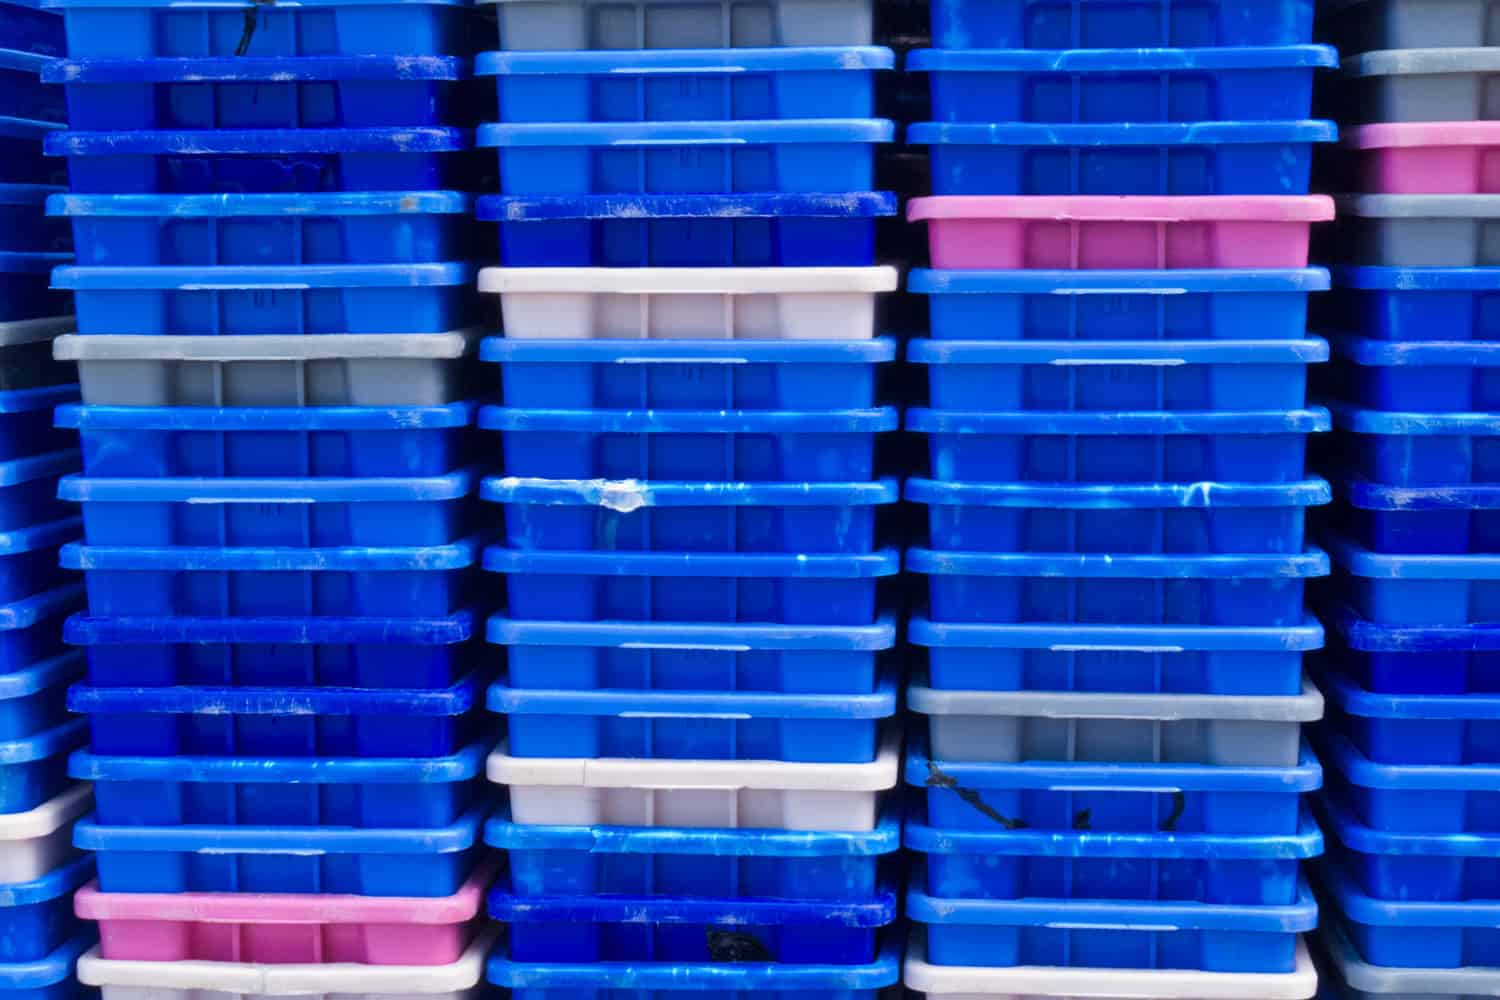 Background texture pattern of stacks of empty colorful plastic containers as used in fishery, wholesale, storage of fresh produce, cargo and retail transportation